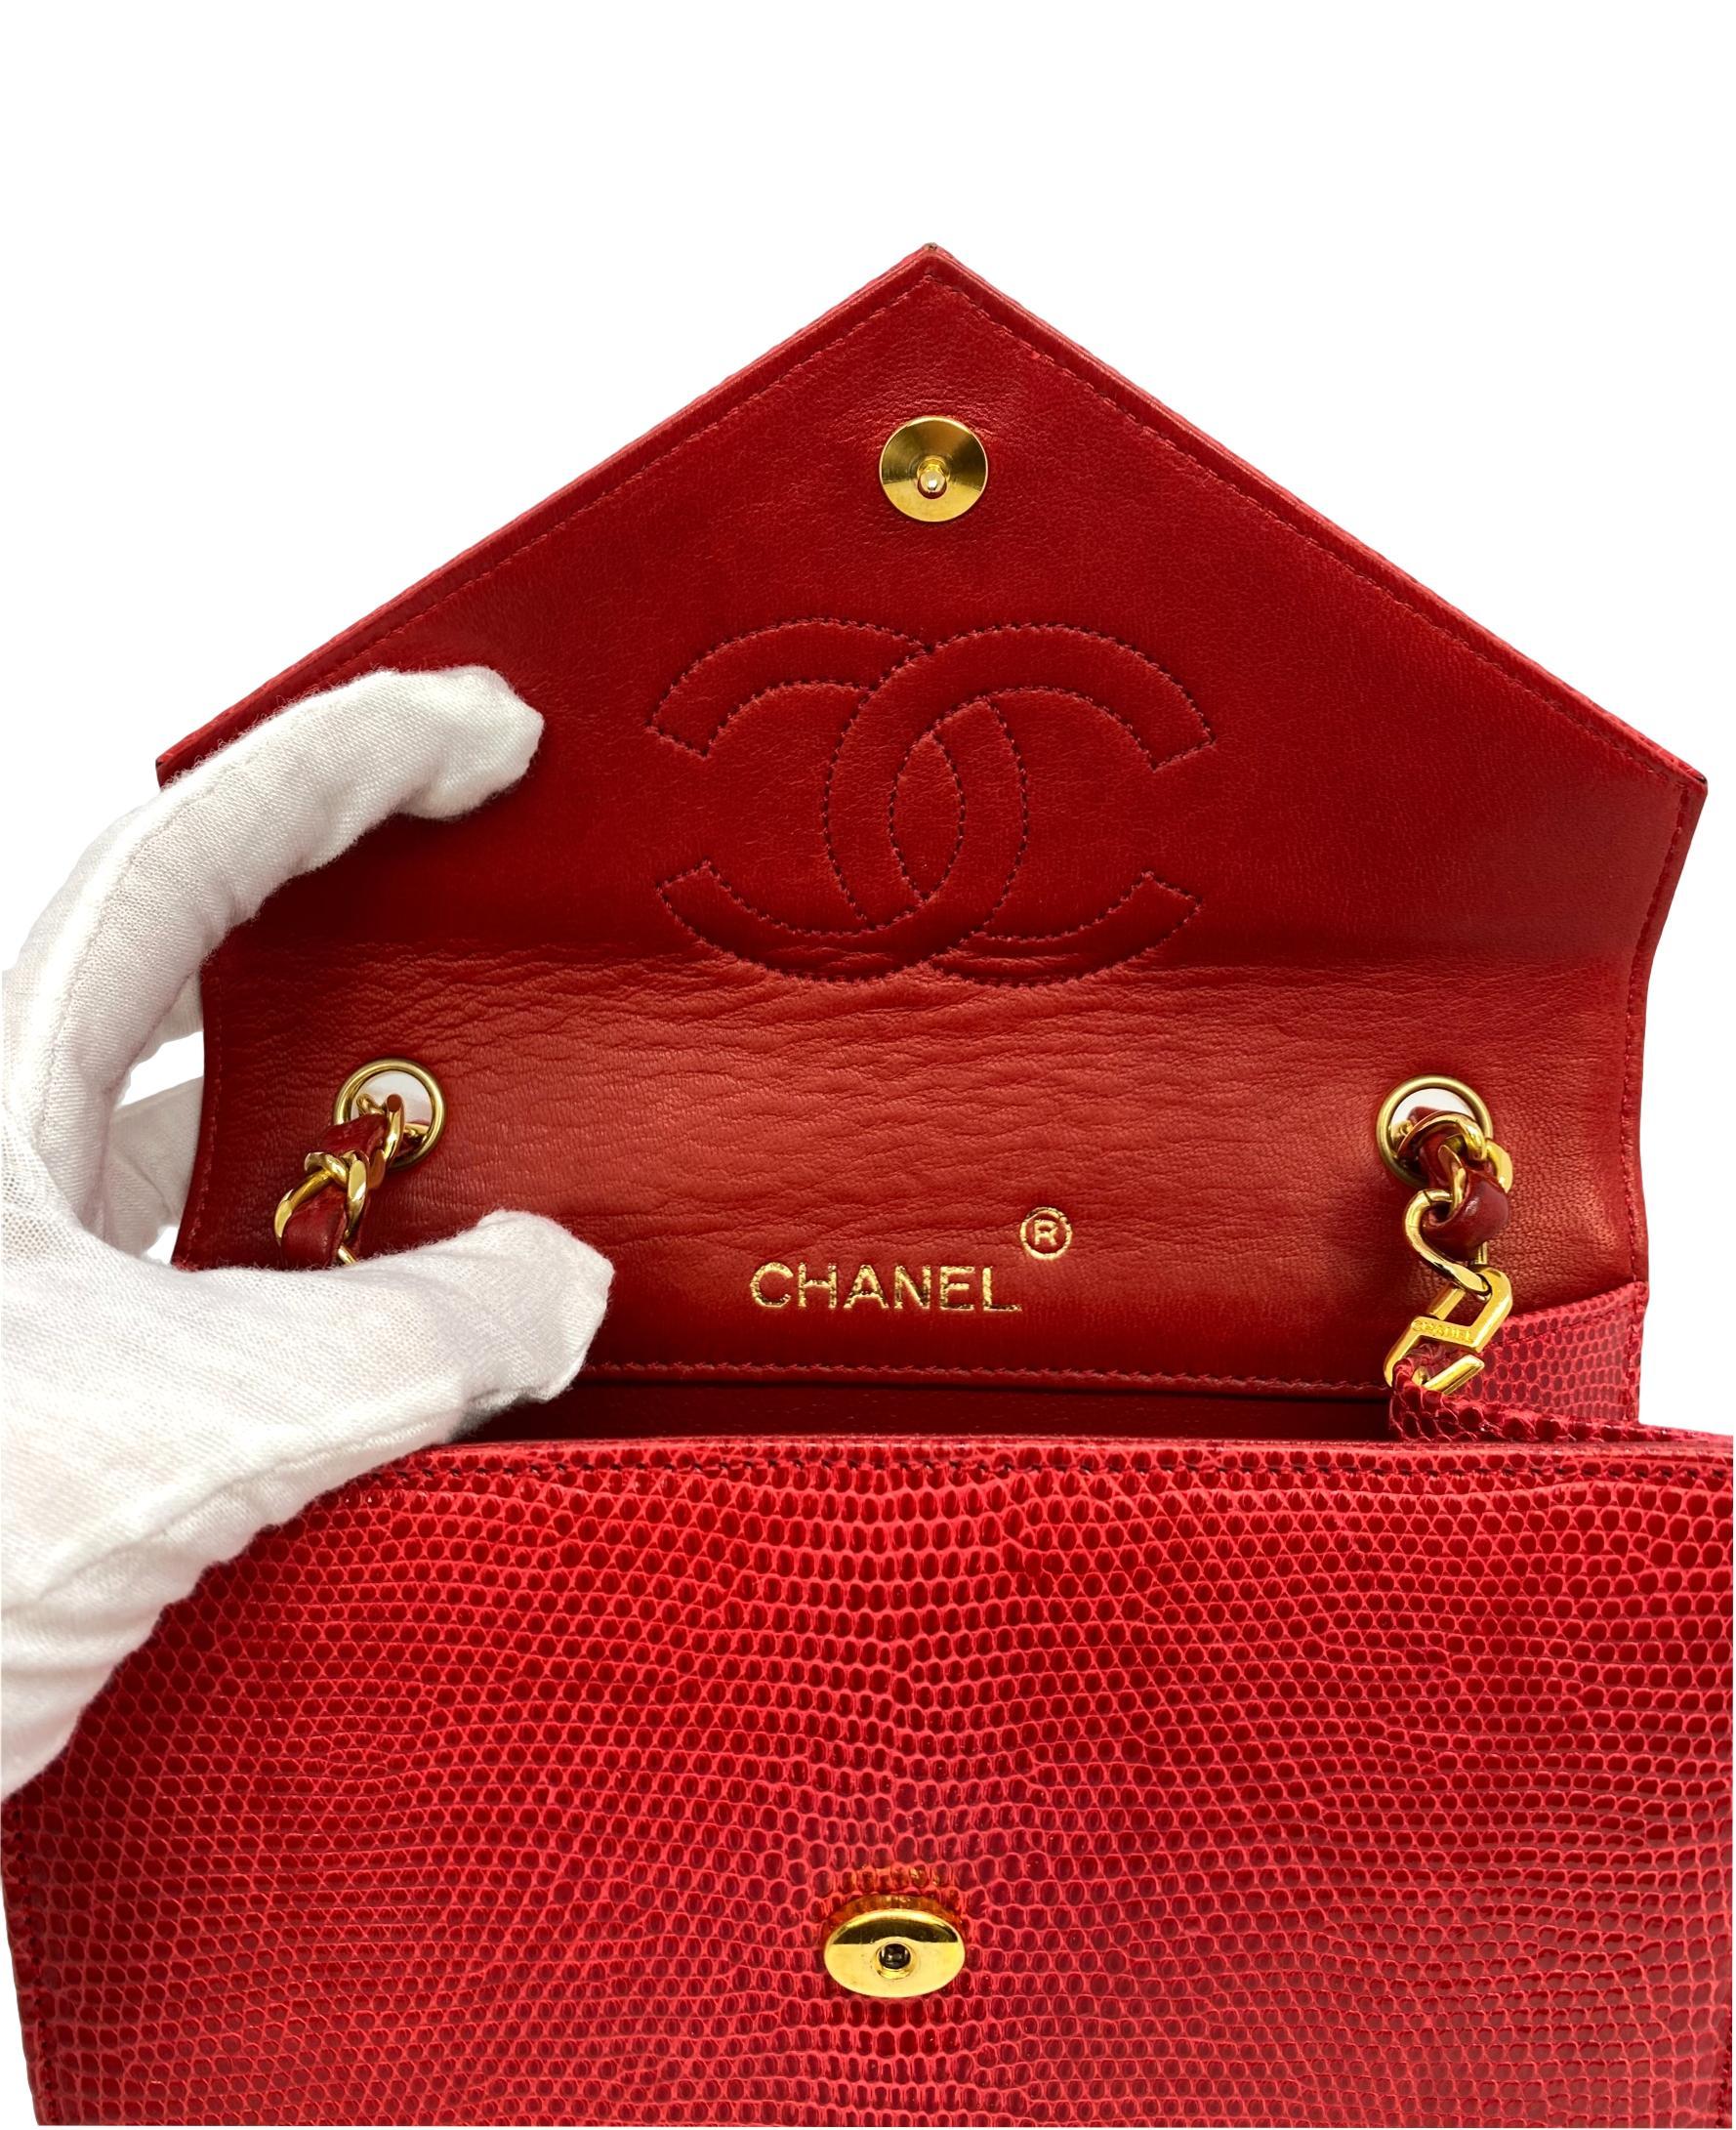 Women's or Men's Chanel Vintage Red Lizard Envelope Cross Body Flap Bag with Gold Hardware